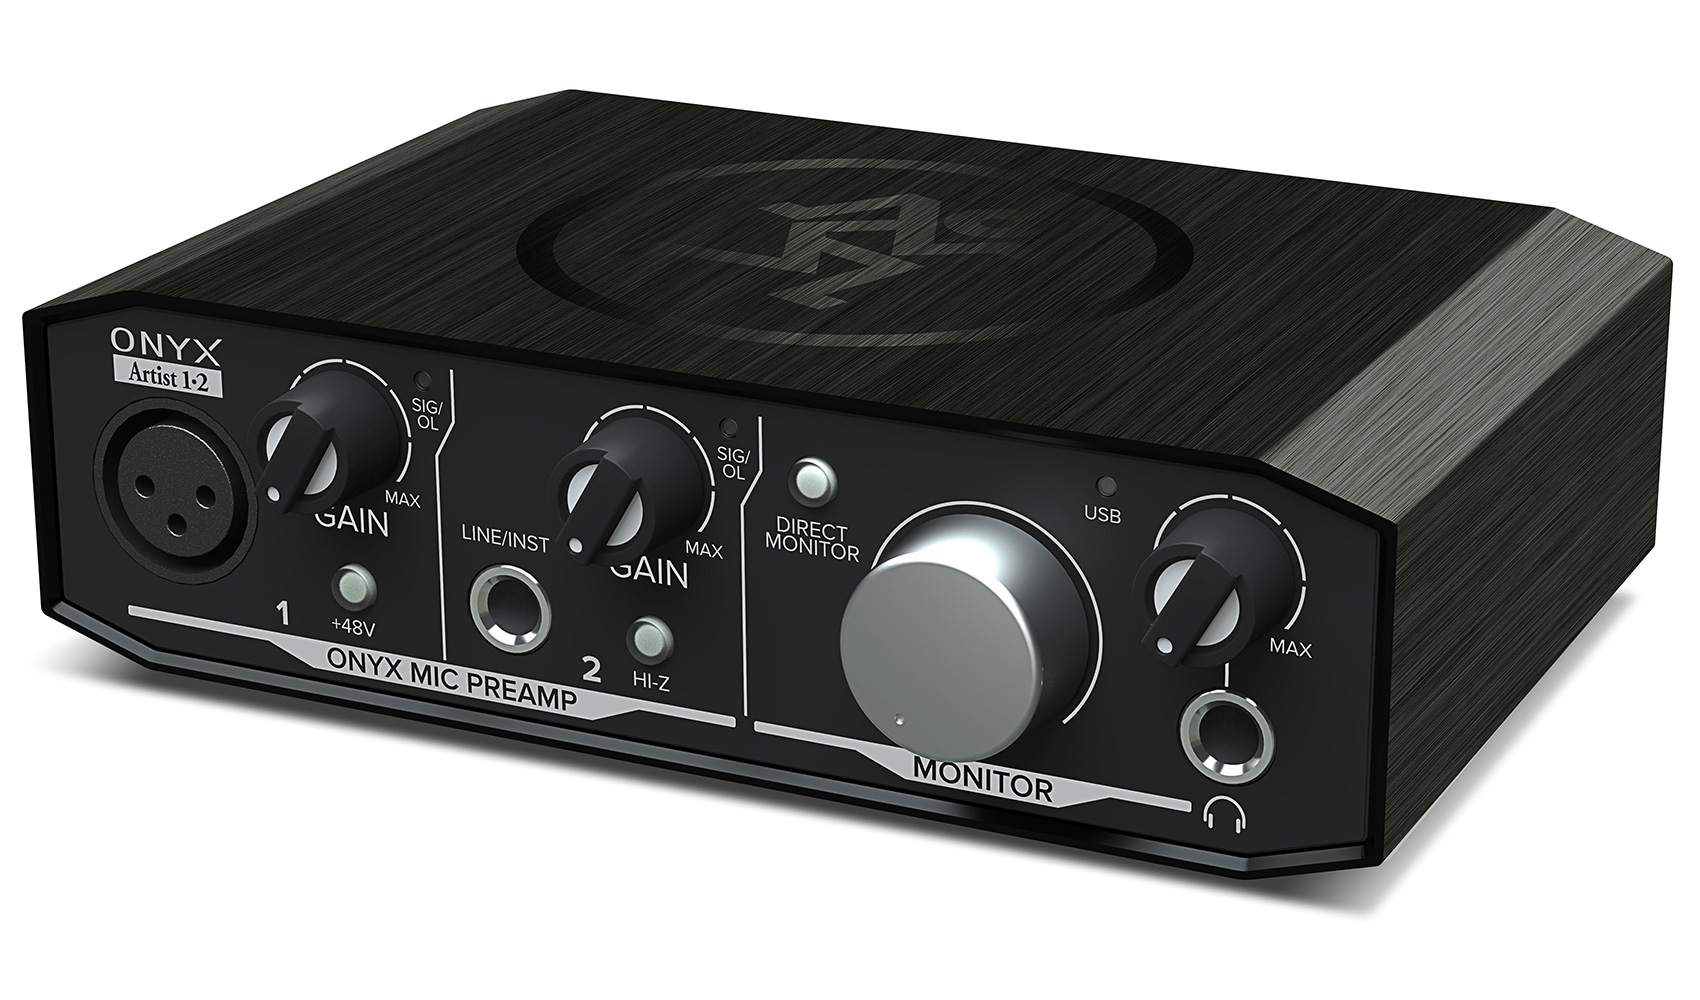 Mackie Onyx Artist 1.2 2x2 USB Audio Recording Studio Interface and Stand - image 4 of 11